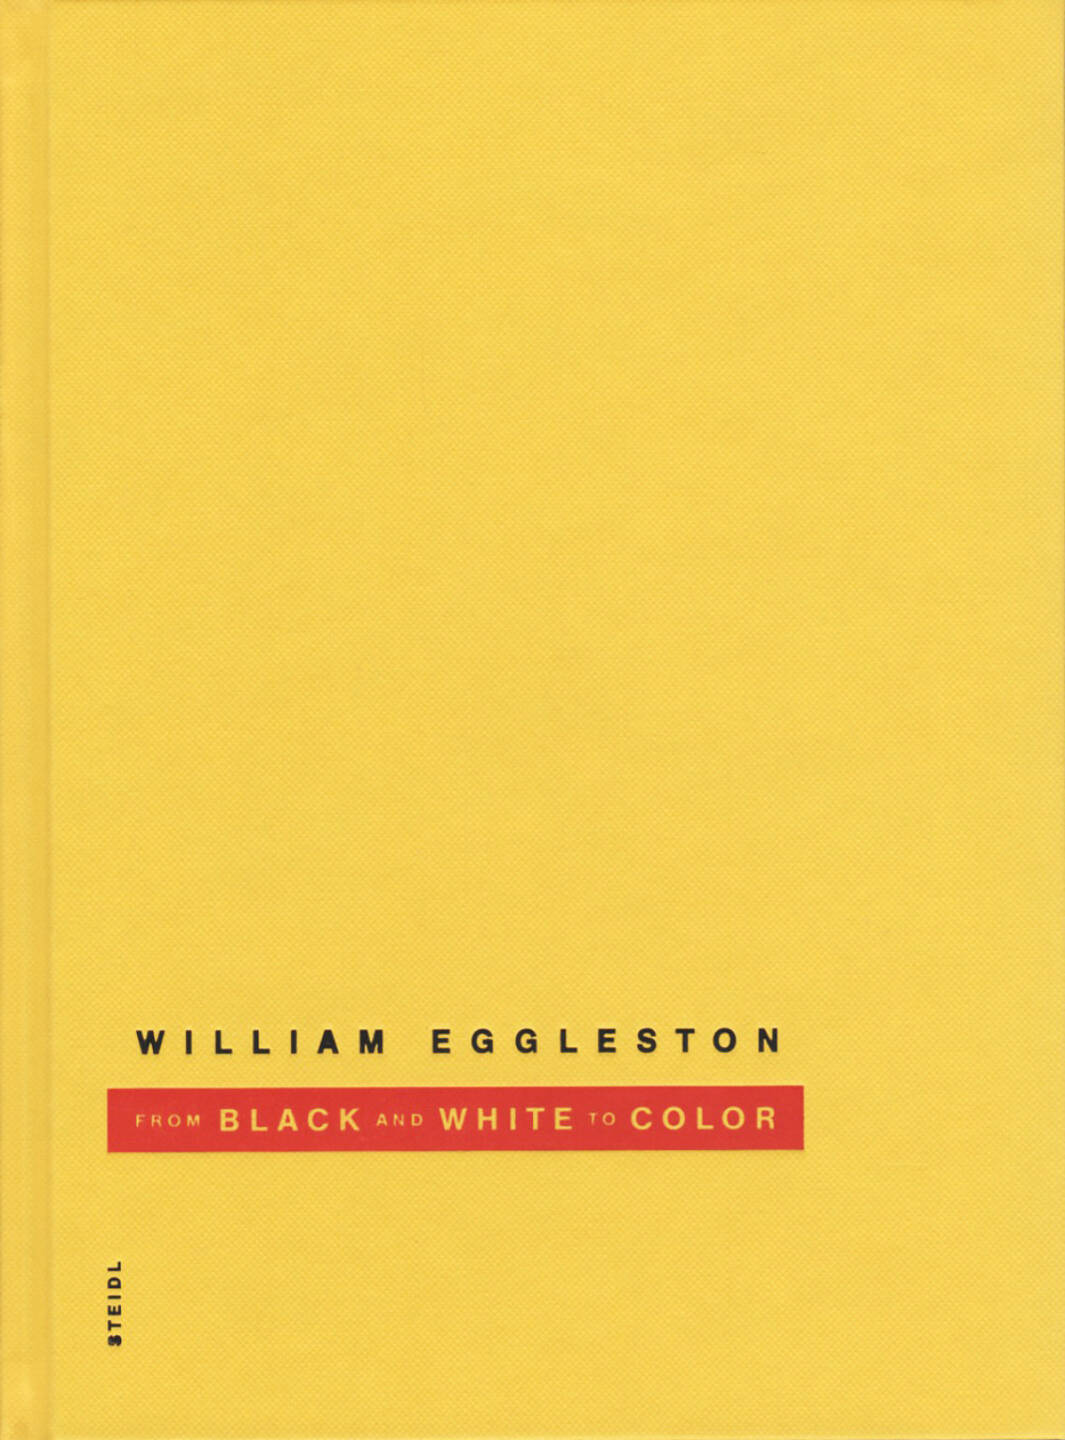 William Eggleston - From Black & White to Color, Steidl, 2014, Cover -http://josefchladek.com/book/william_eggleston_-_from_black_white_to_color